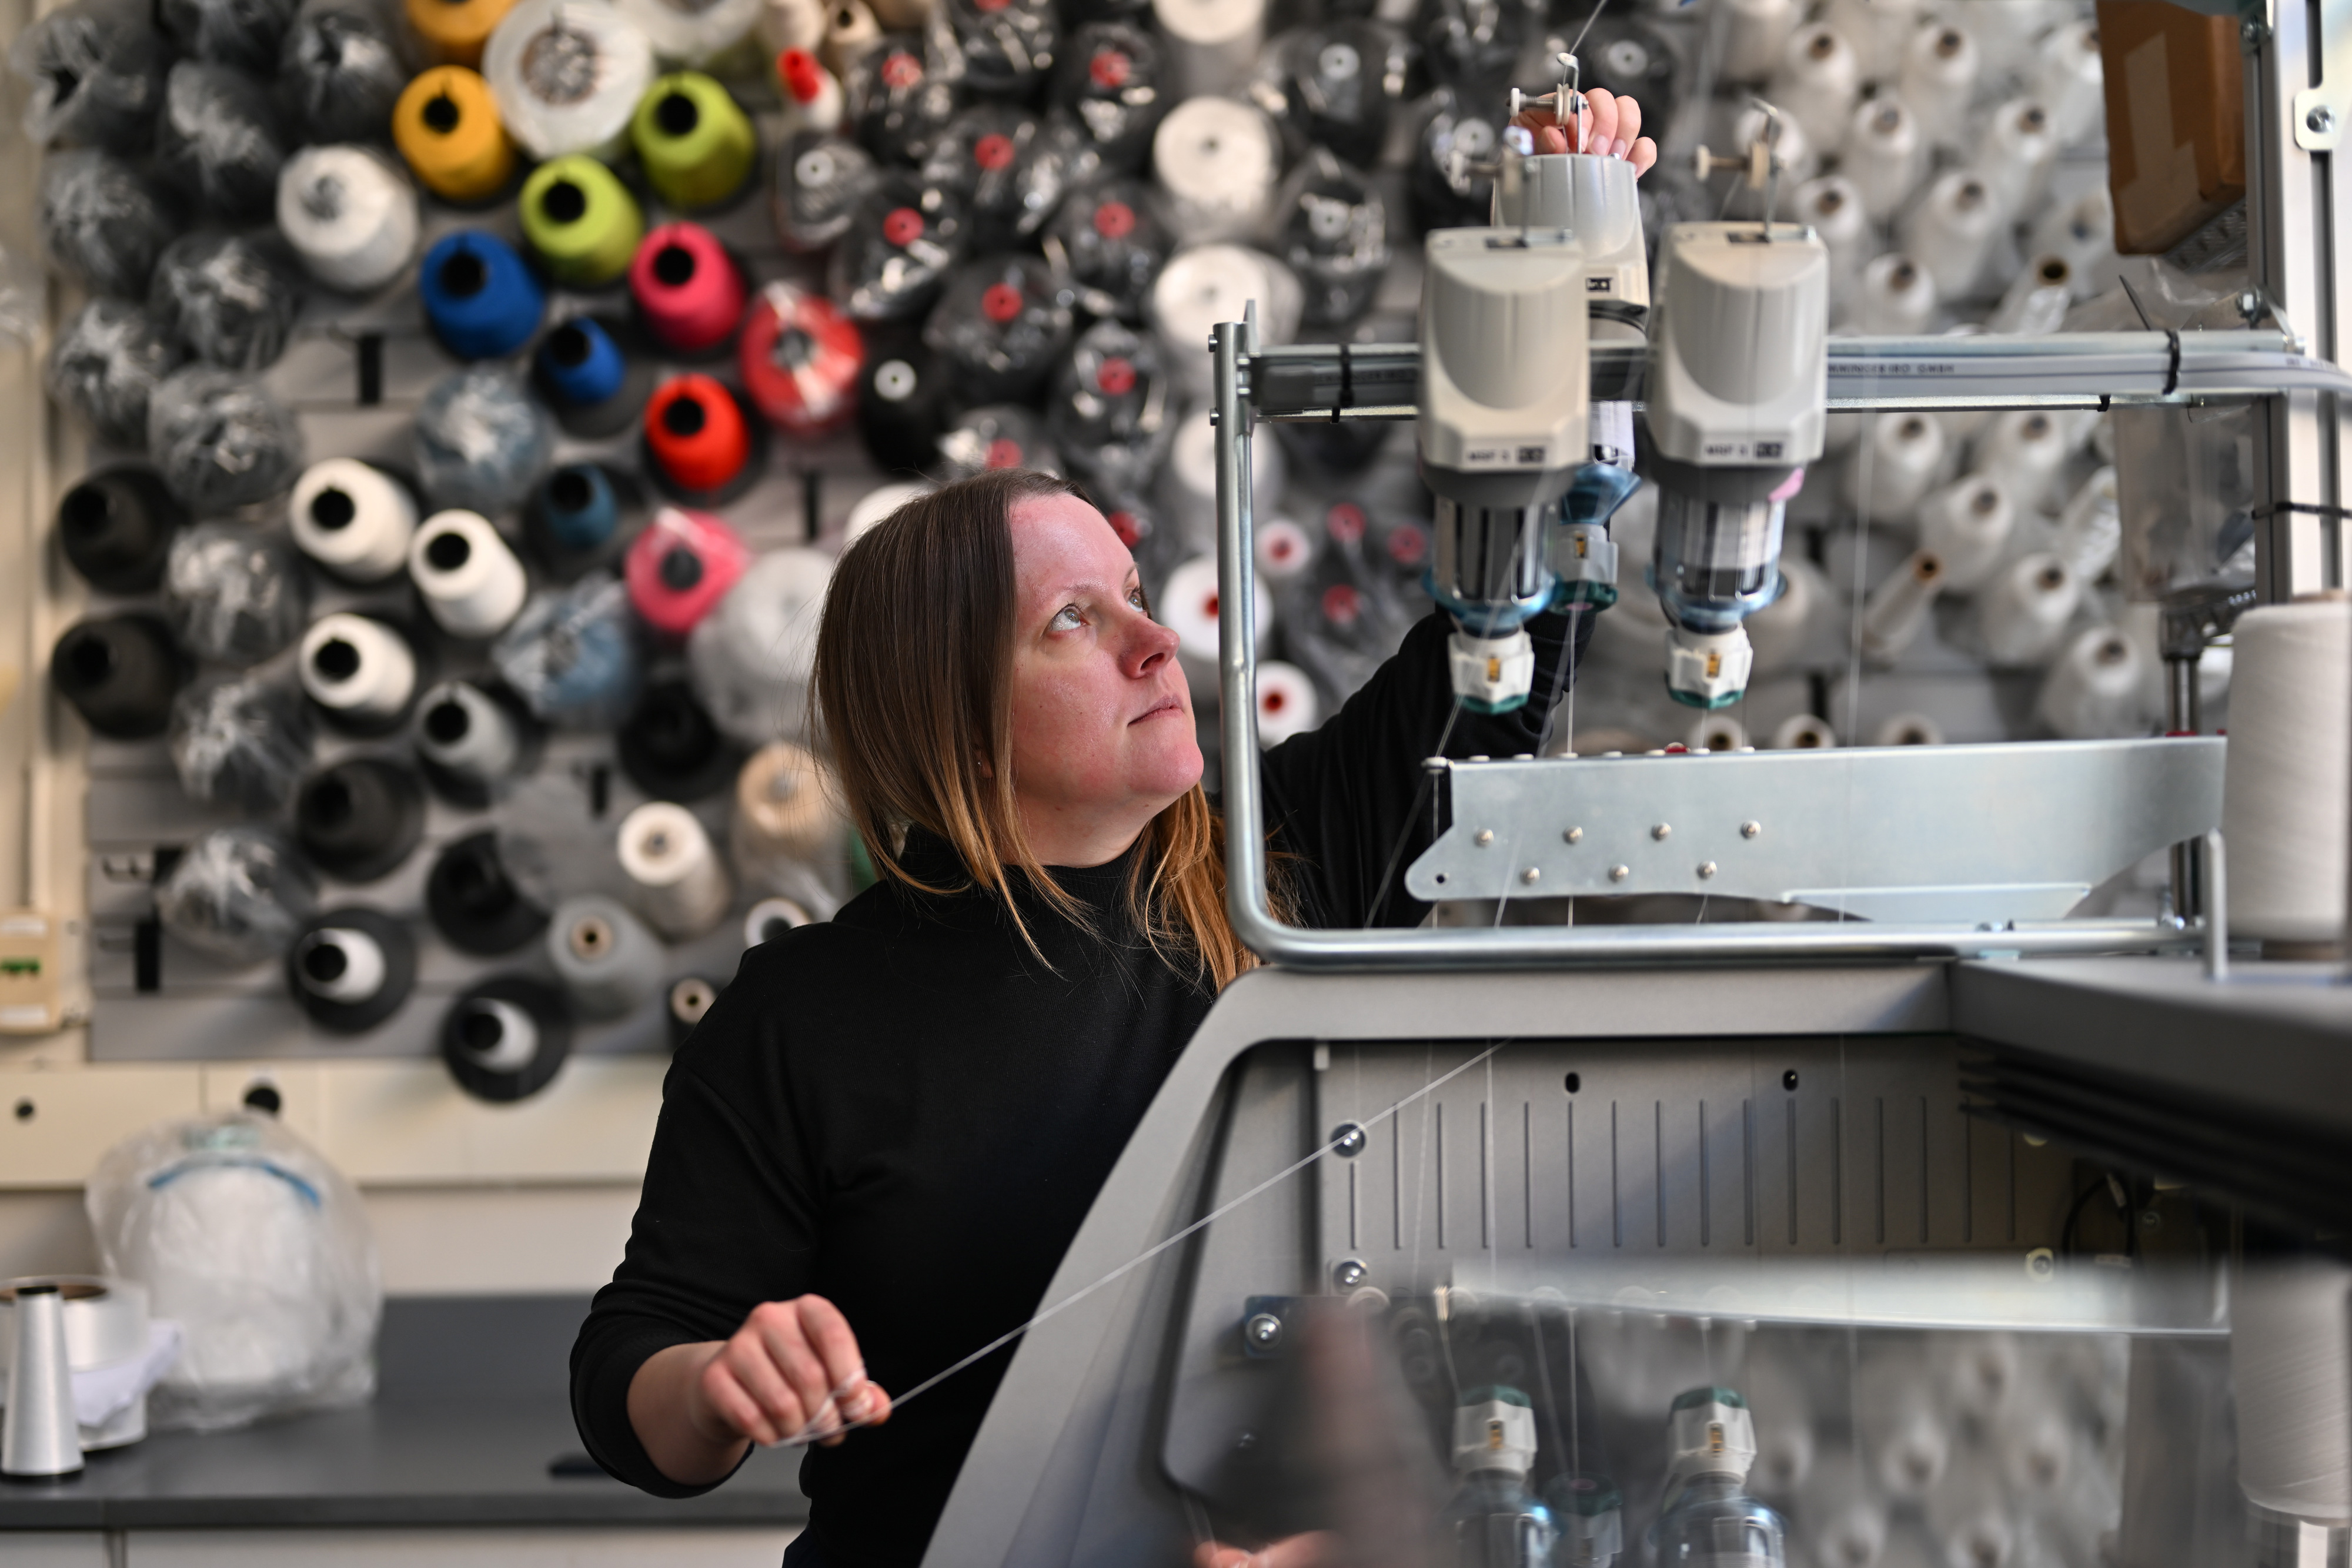 PhD student Lavender Tessmer has devoted herself to several projects throughout grad school, but all share a common thread: an emphasis on fiber development and textile programming. “At MIT, my interest in textiles really exploded and became the center of everything,” she says.